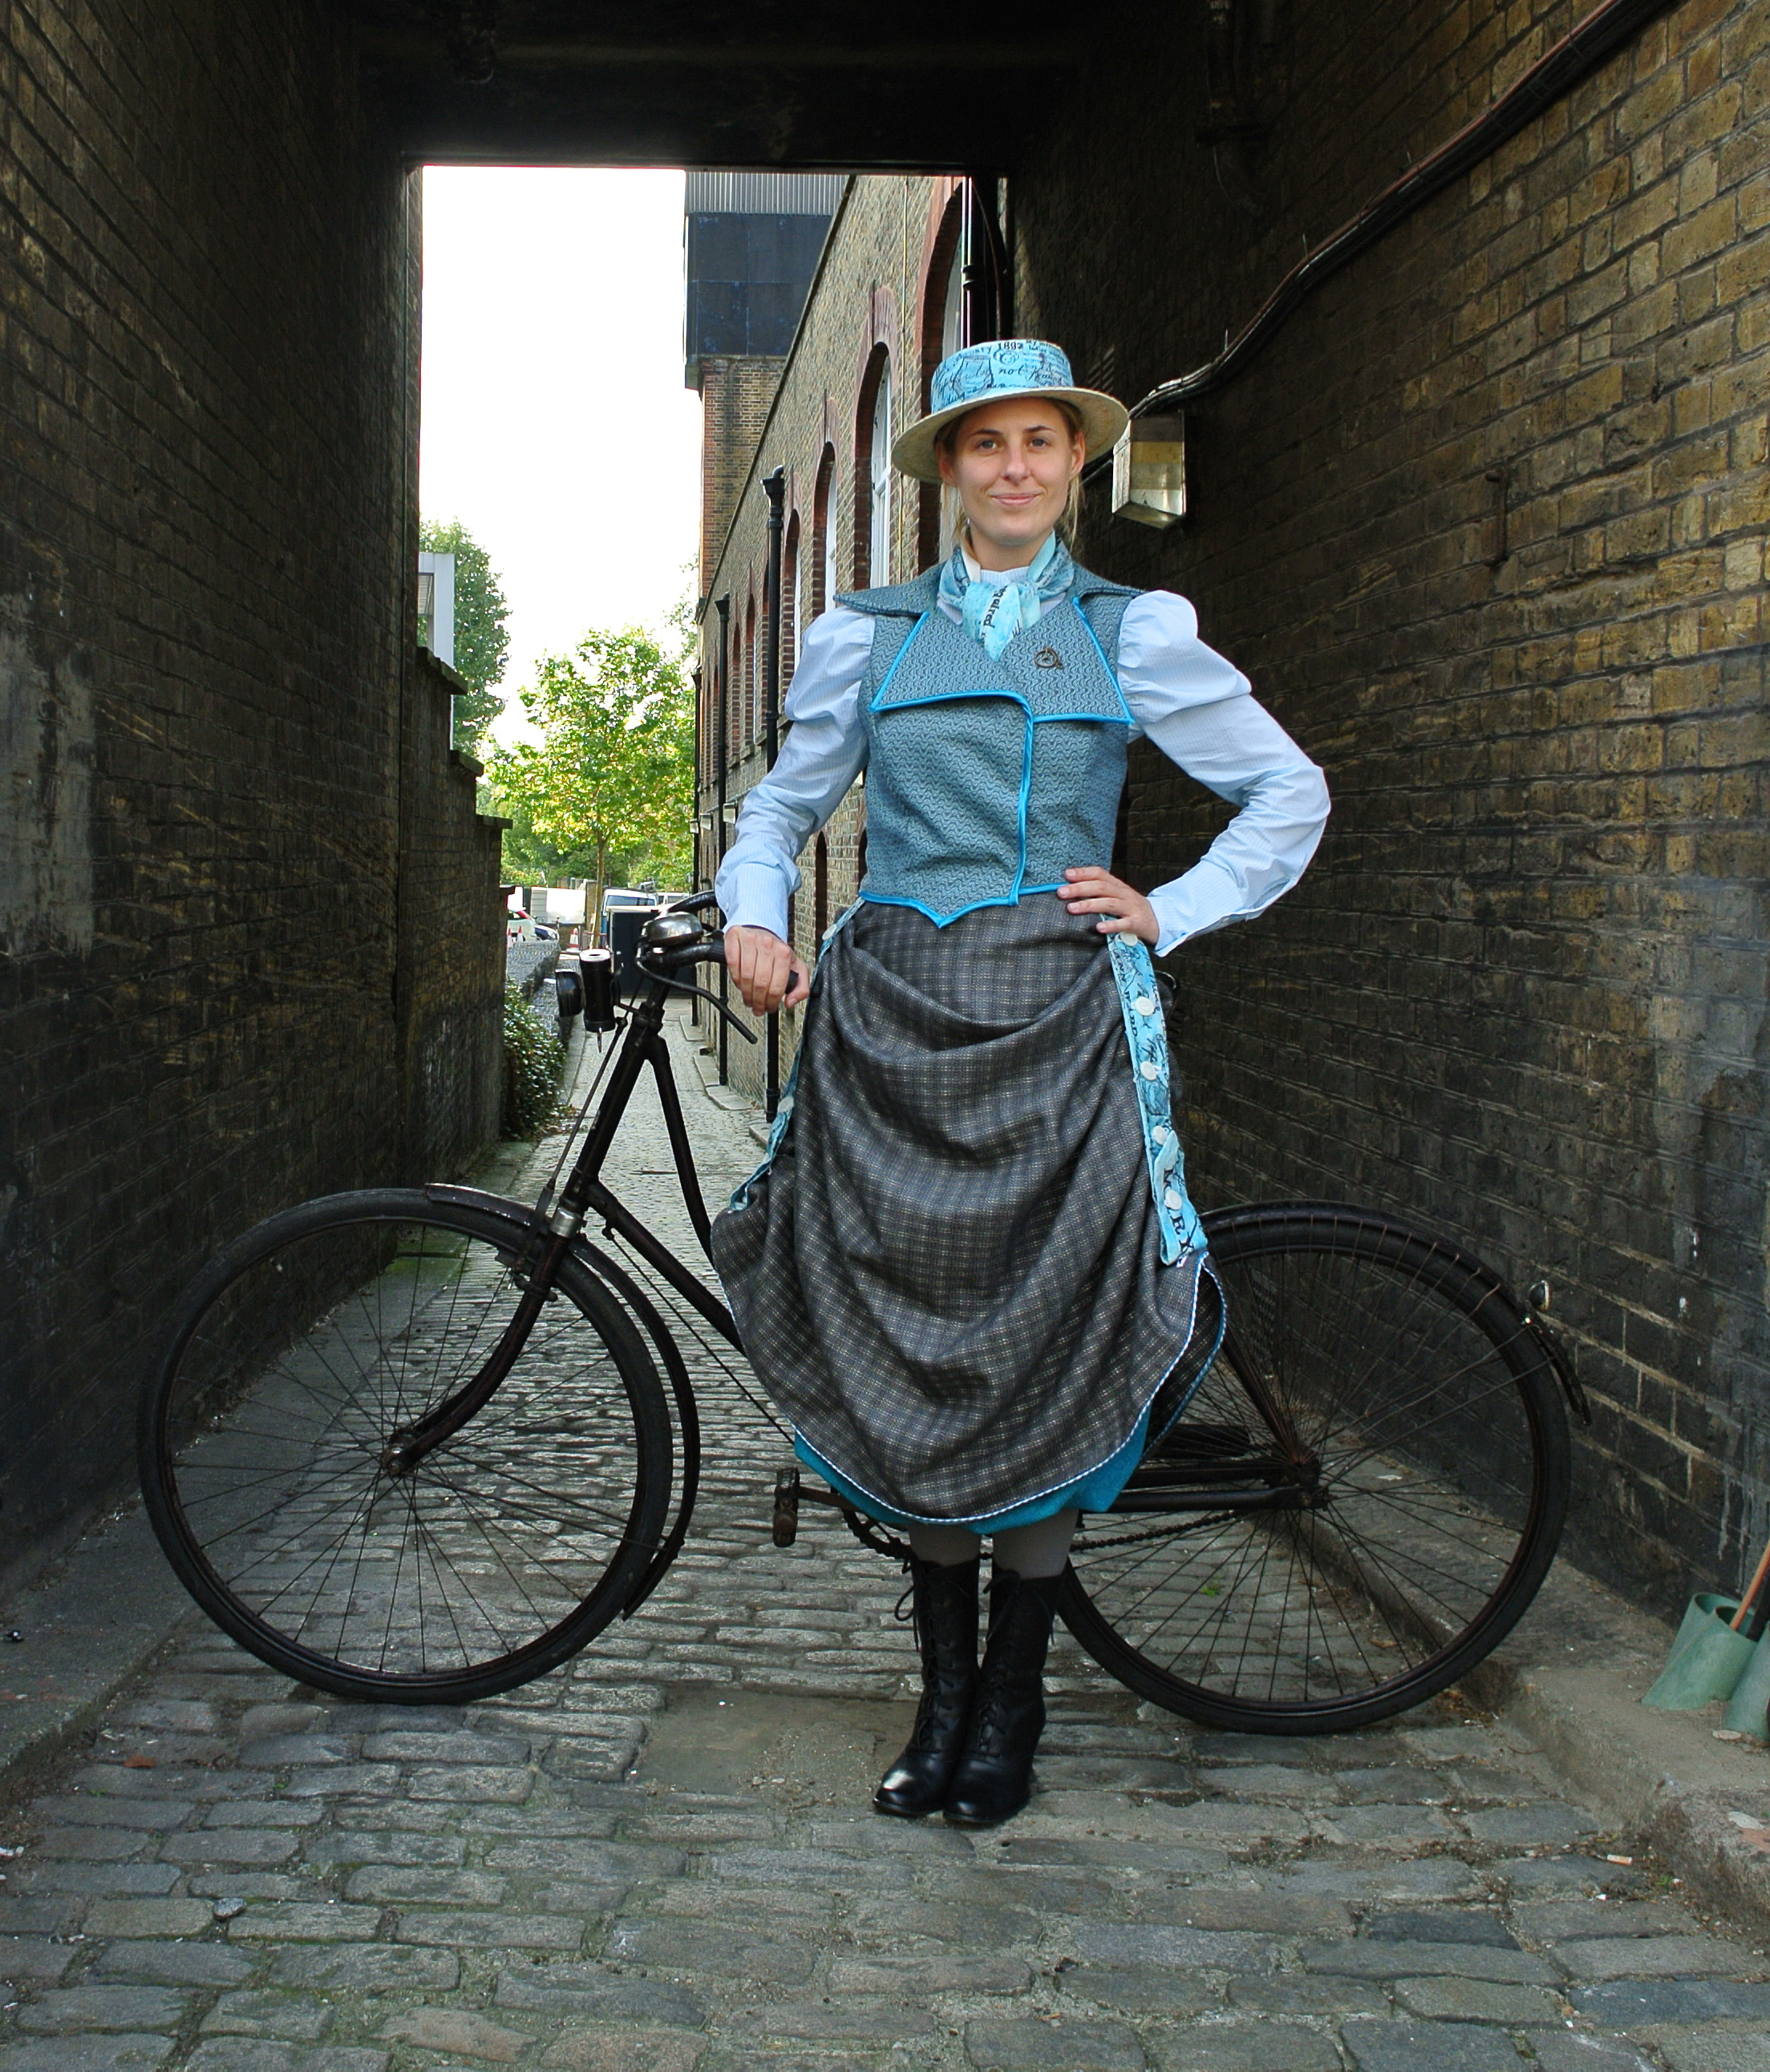 The Hyde Park Safety Skirt enabled women to cycle in safety (Charlotte Barnes/PA)